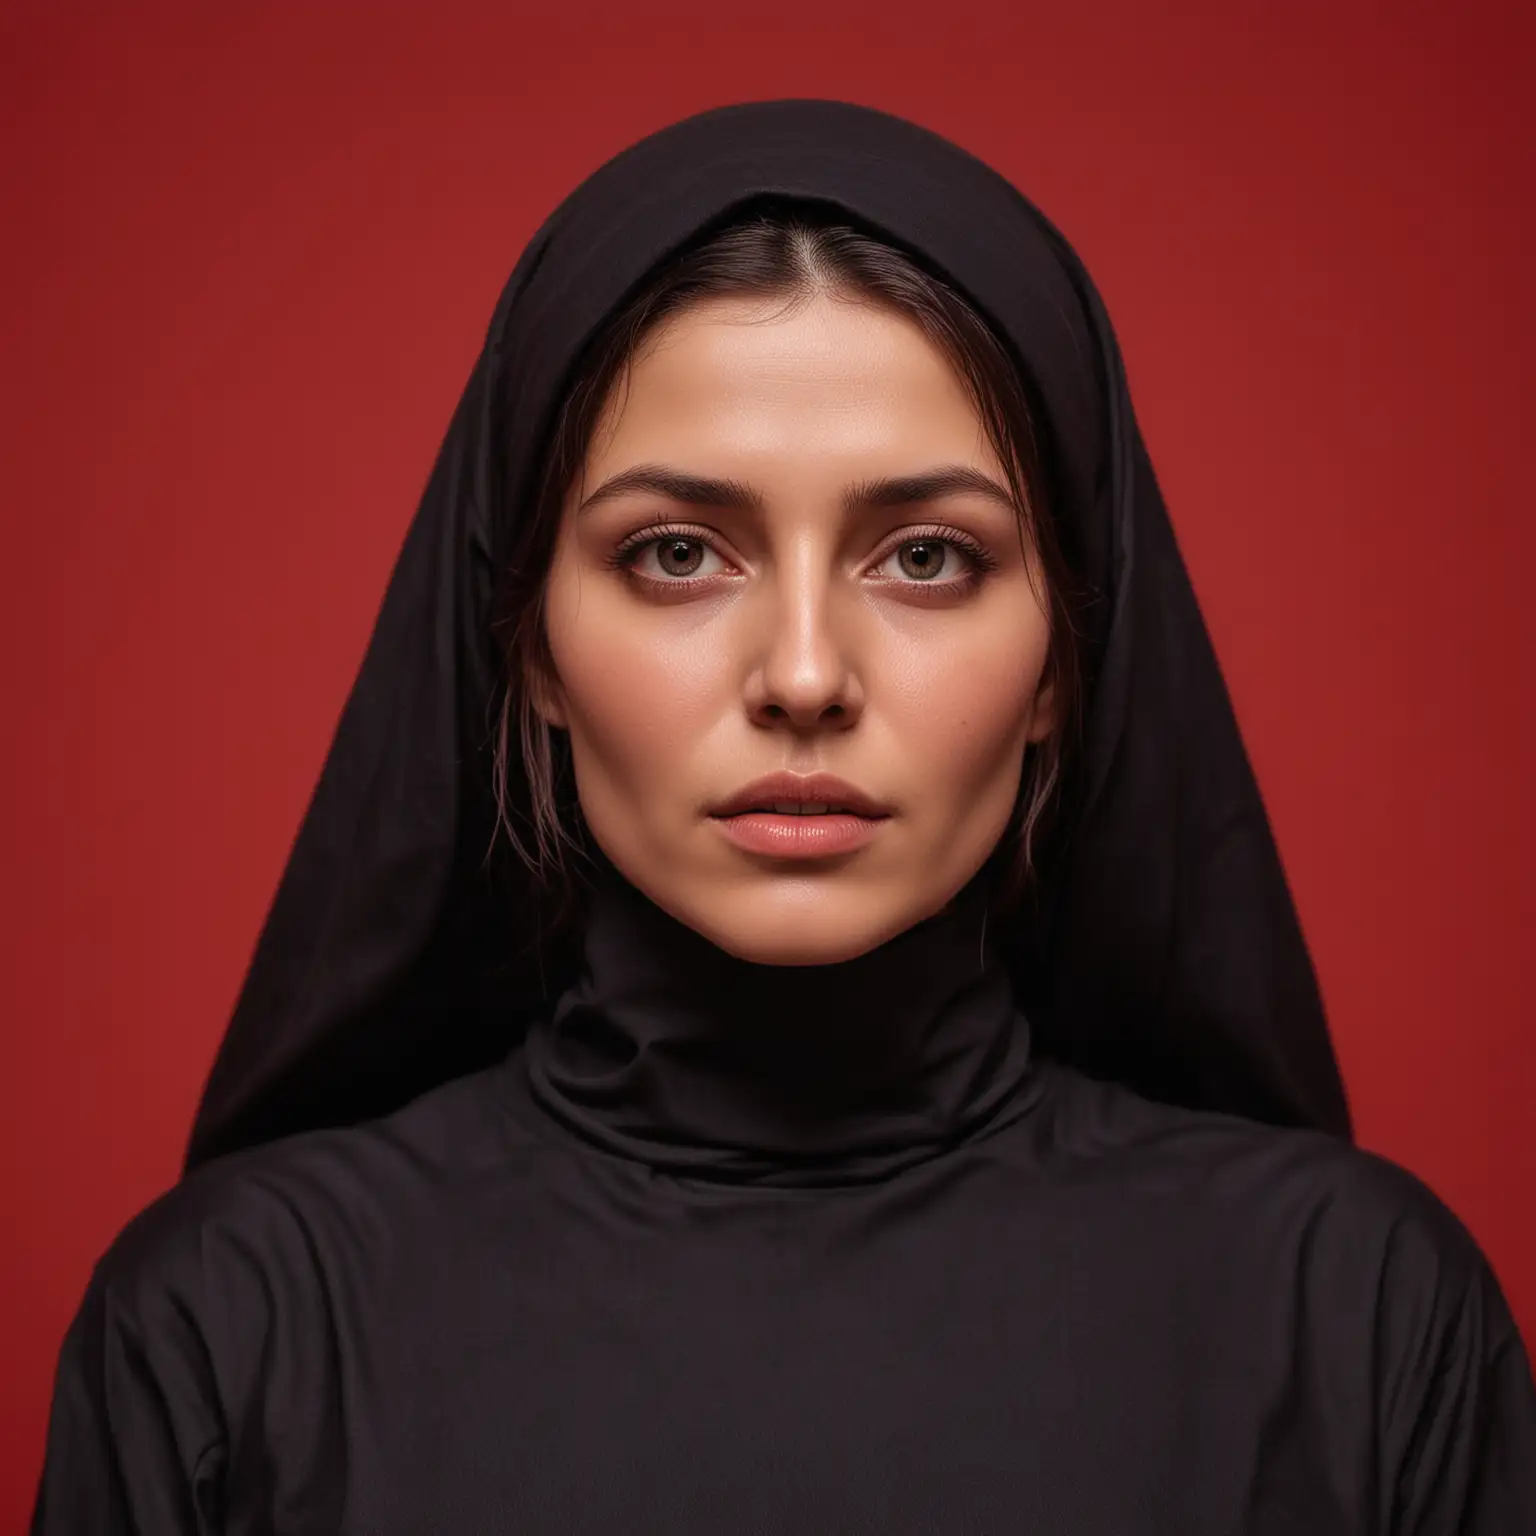 Woman in Black Burka Against Red Background